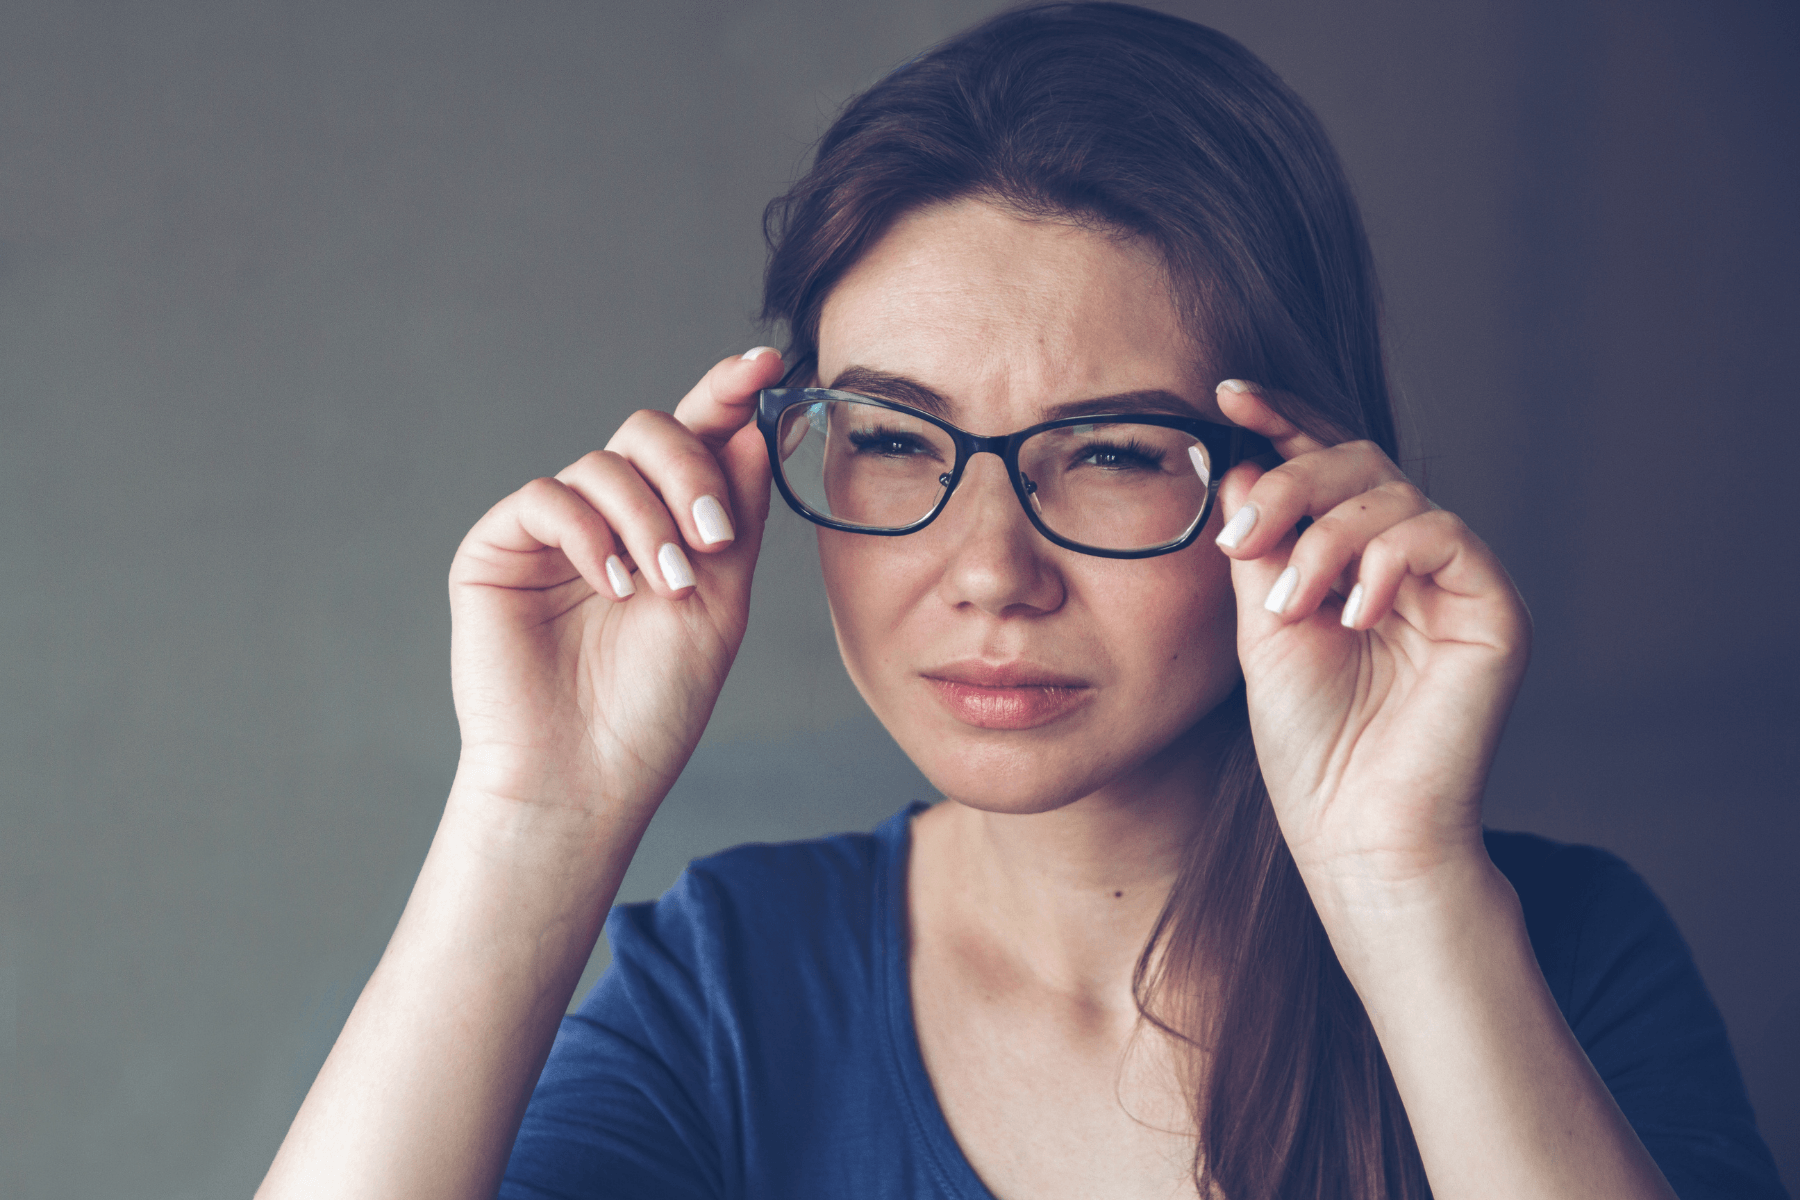 Woman squinting and looking through glasses